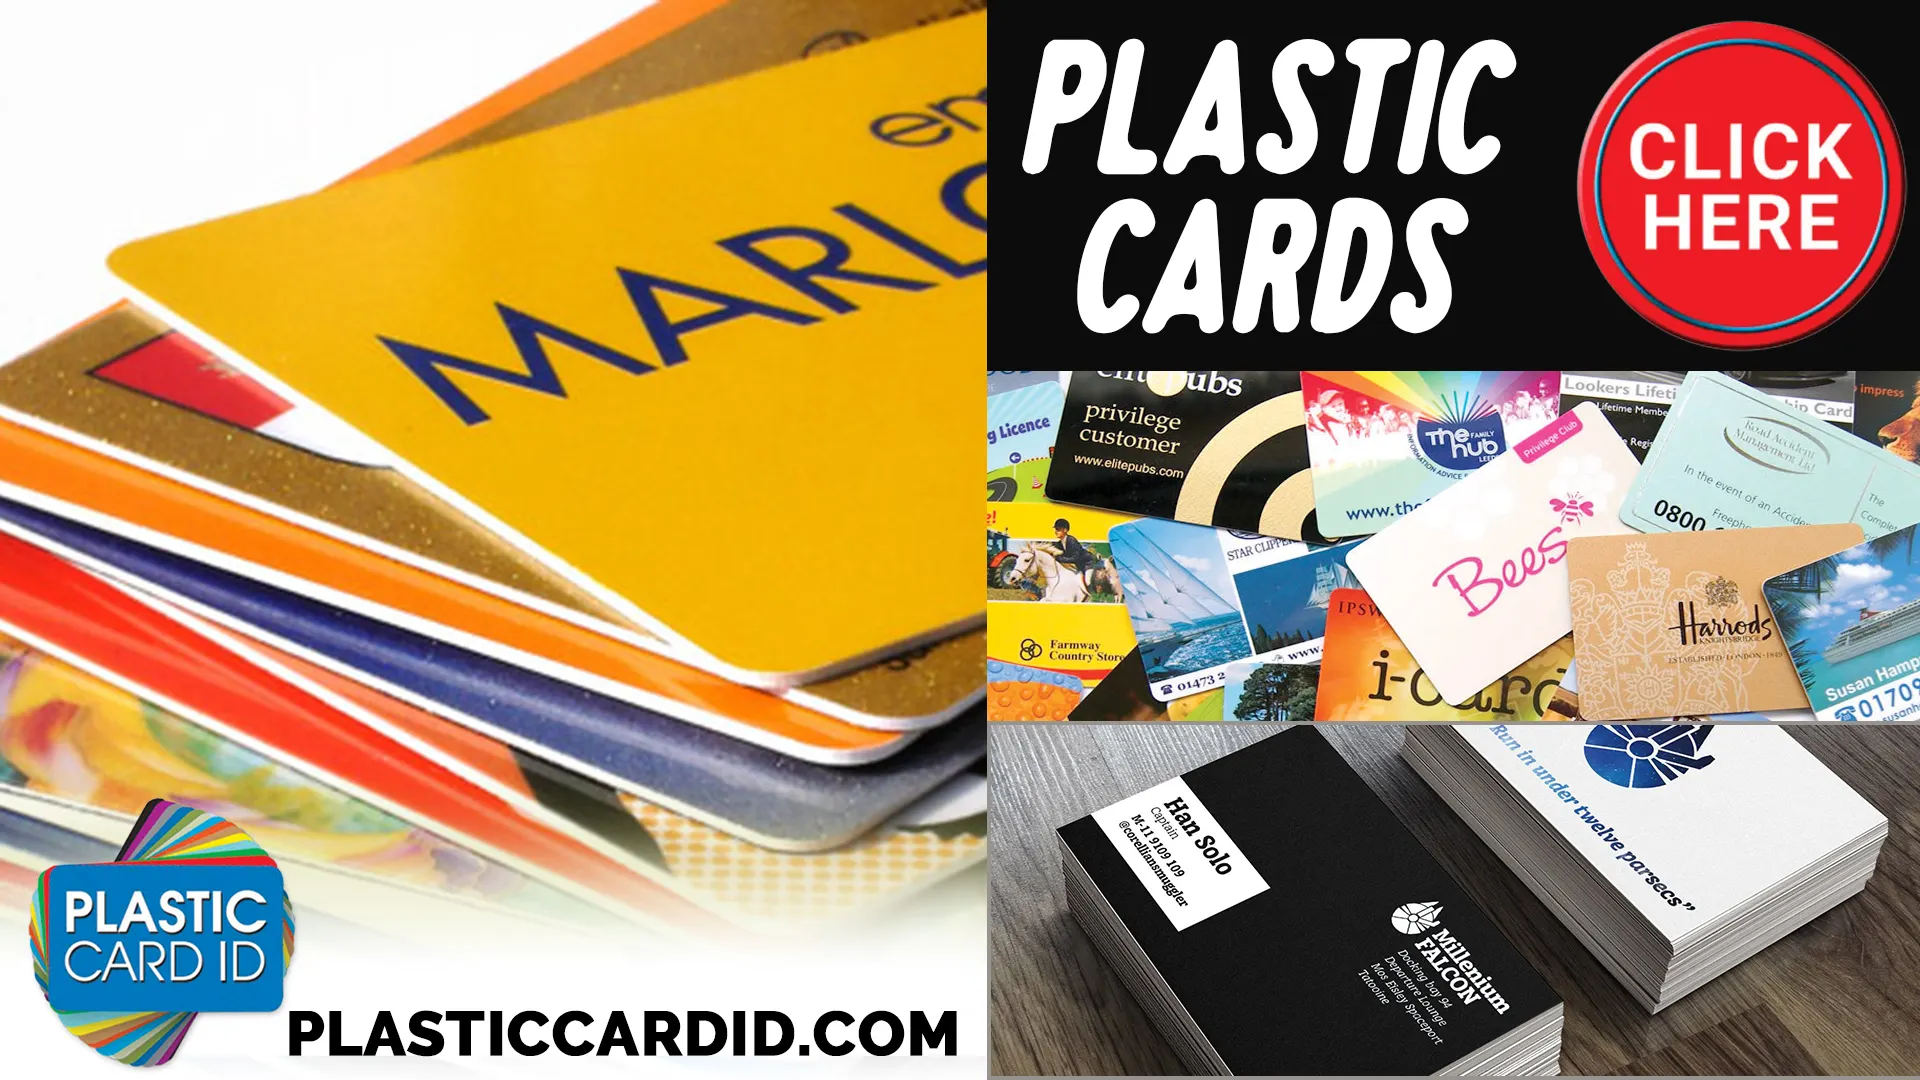 Welcome to the World of Enhanced Security with Our Plastic Cards